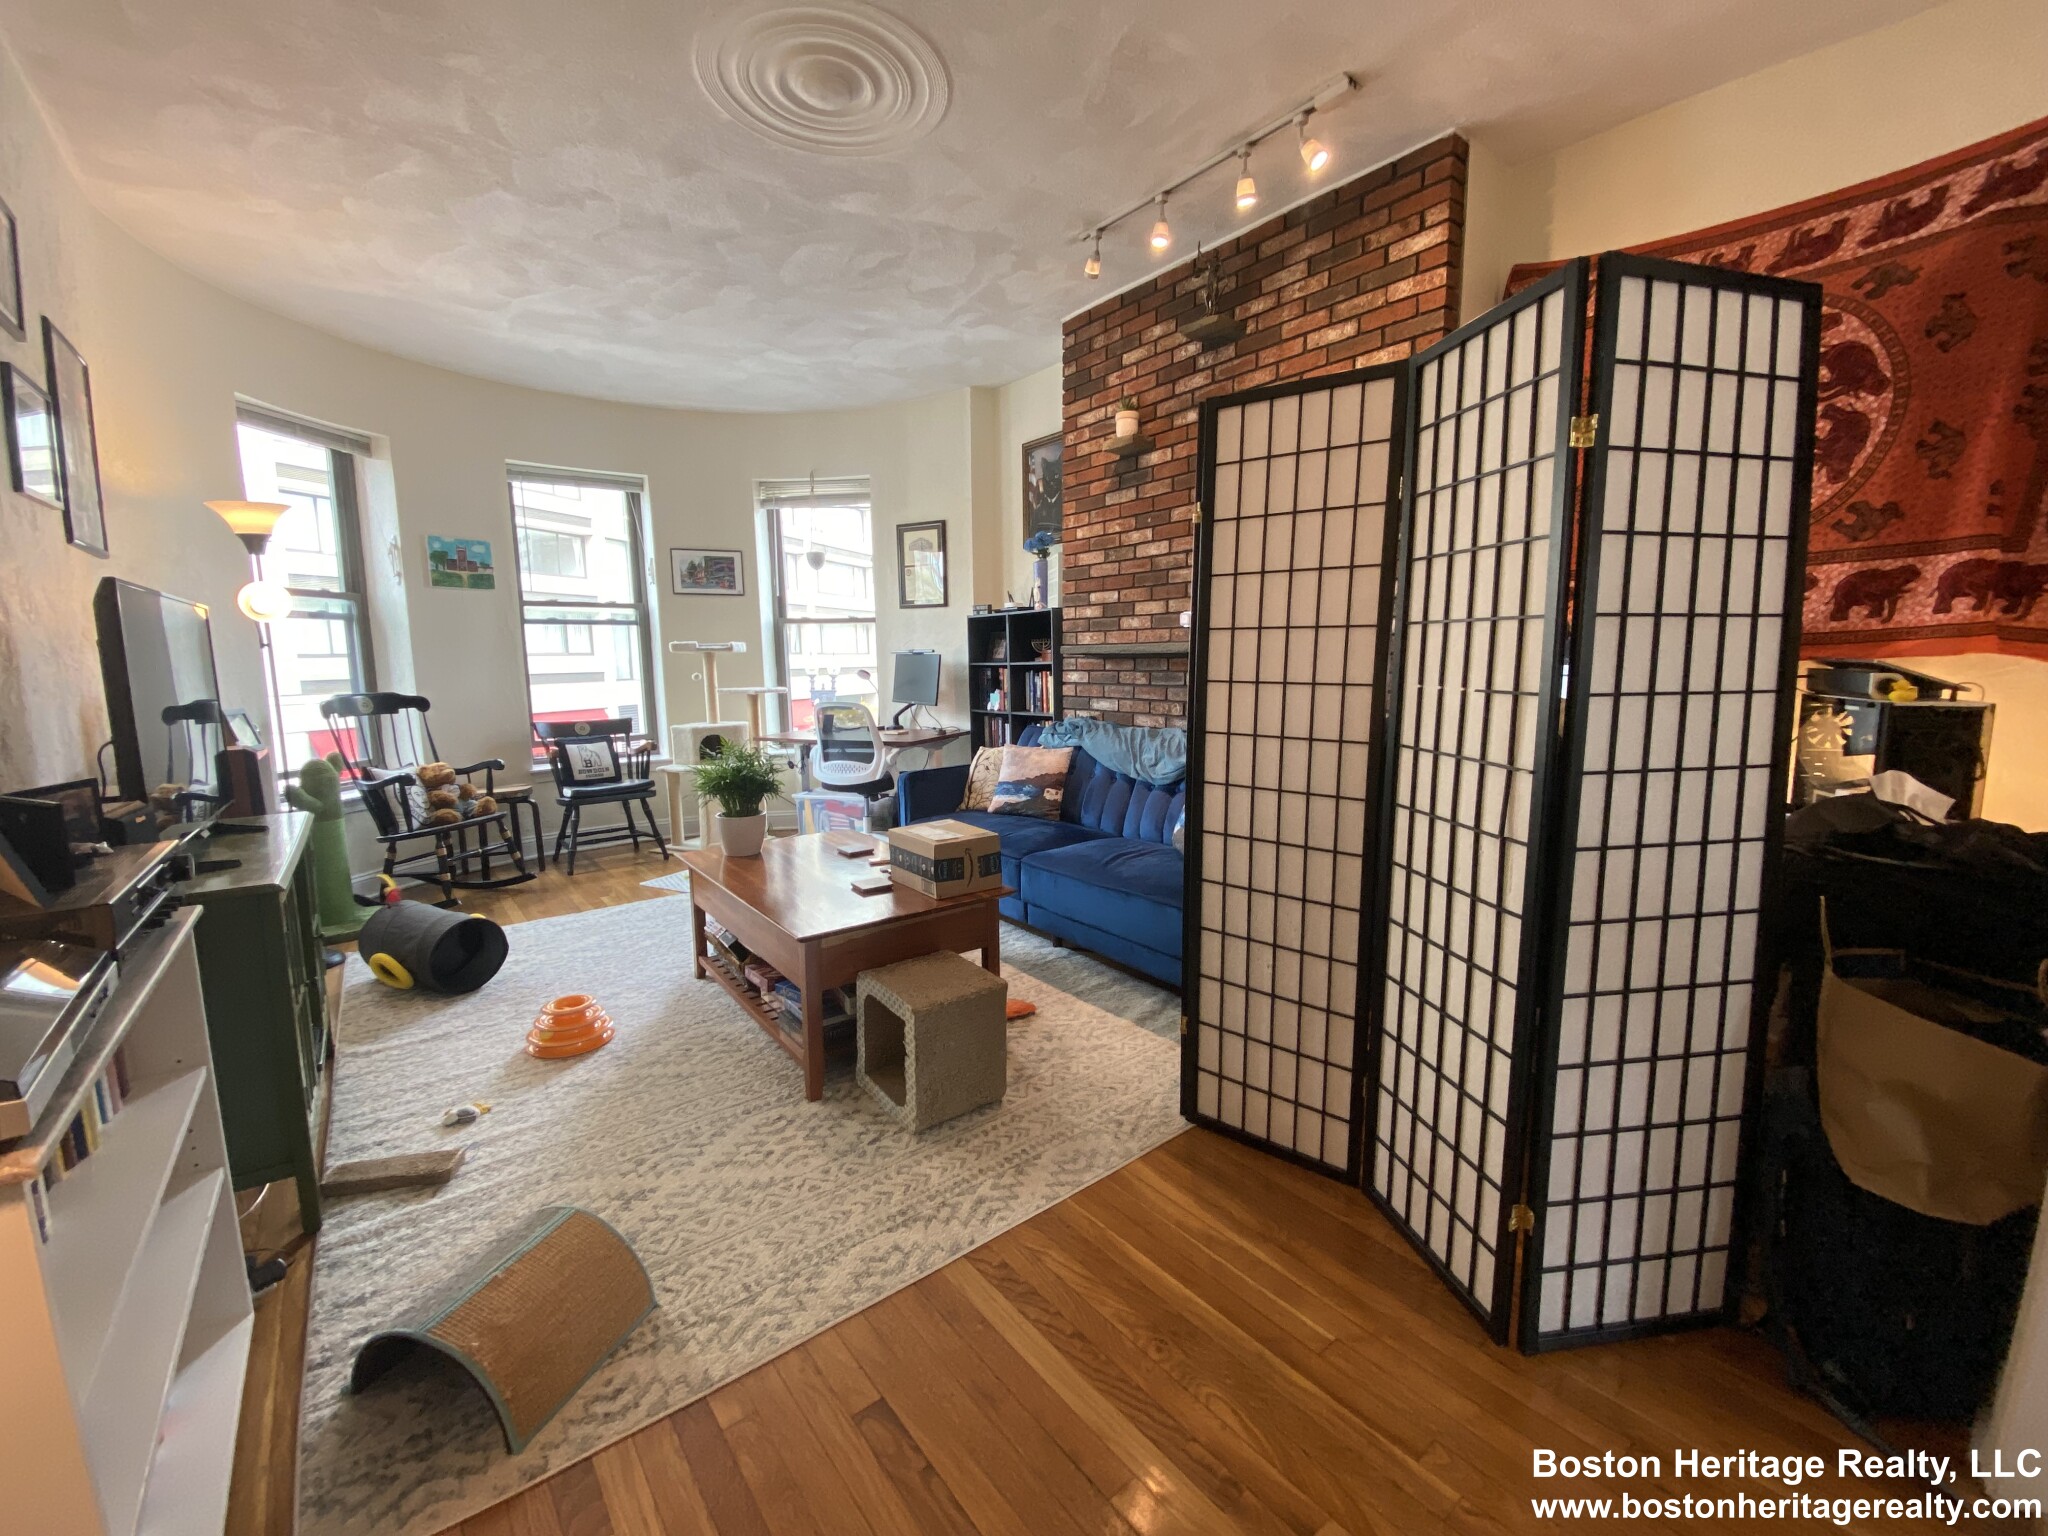 1 Bed, 1 Bath apartment in Boston, Fenway for $2,450